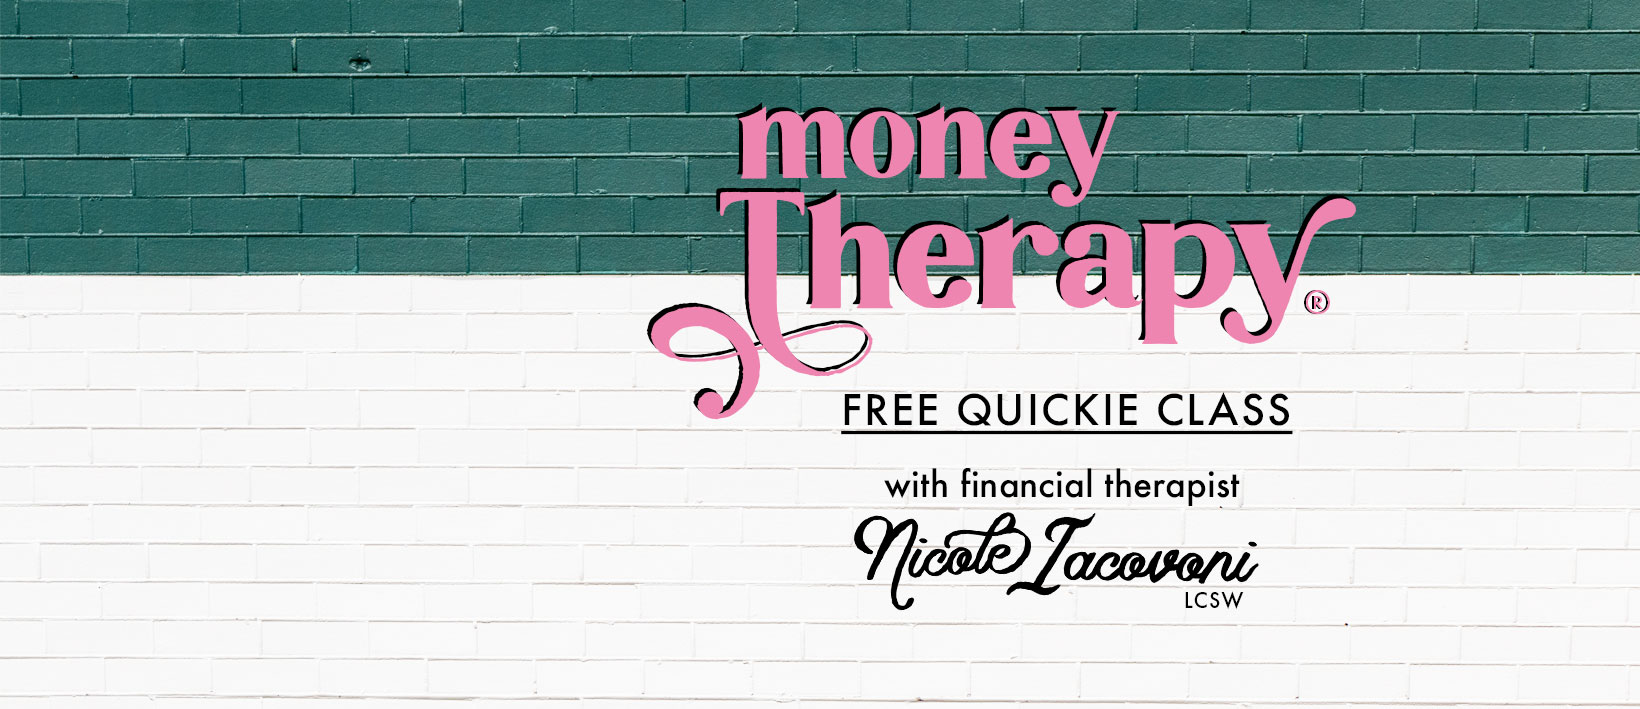 Money Therapy Quickie Class Logo on Green Brick Wall